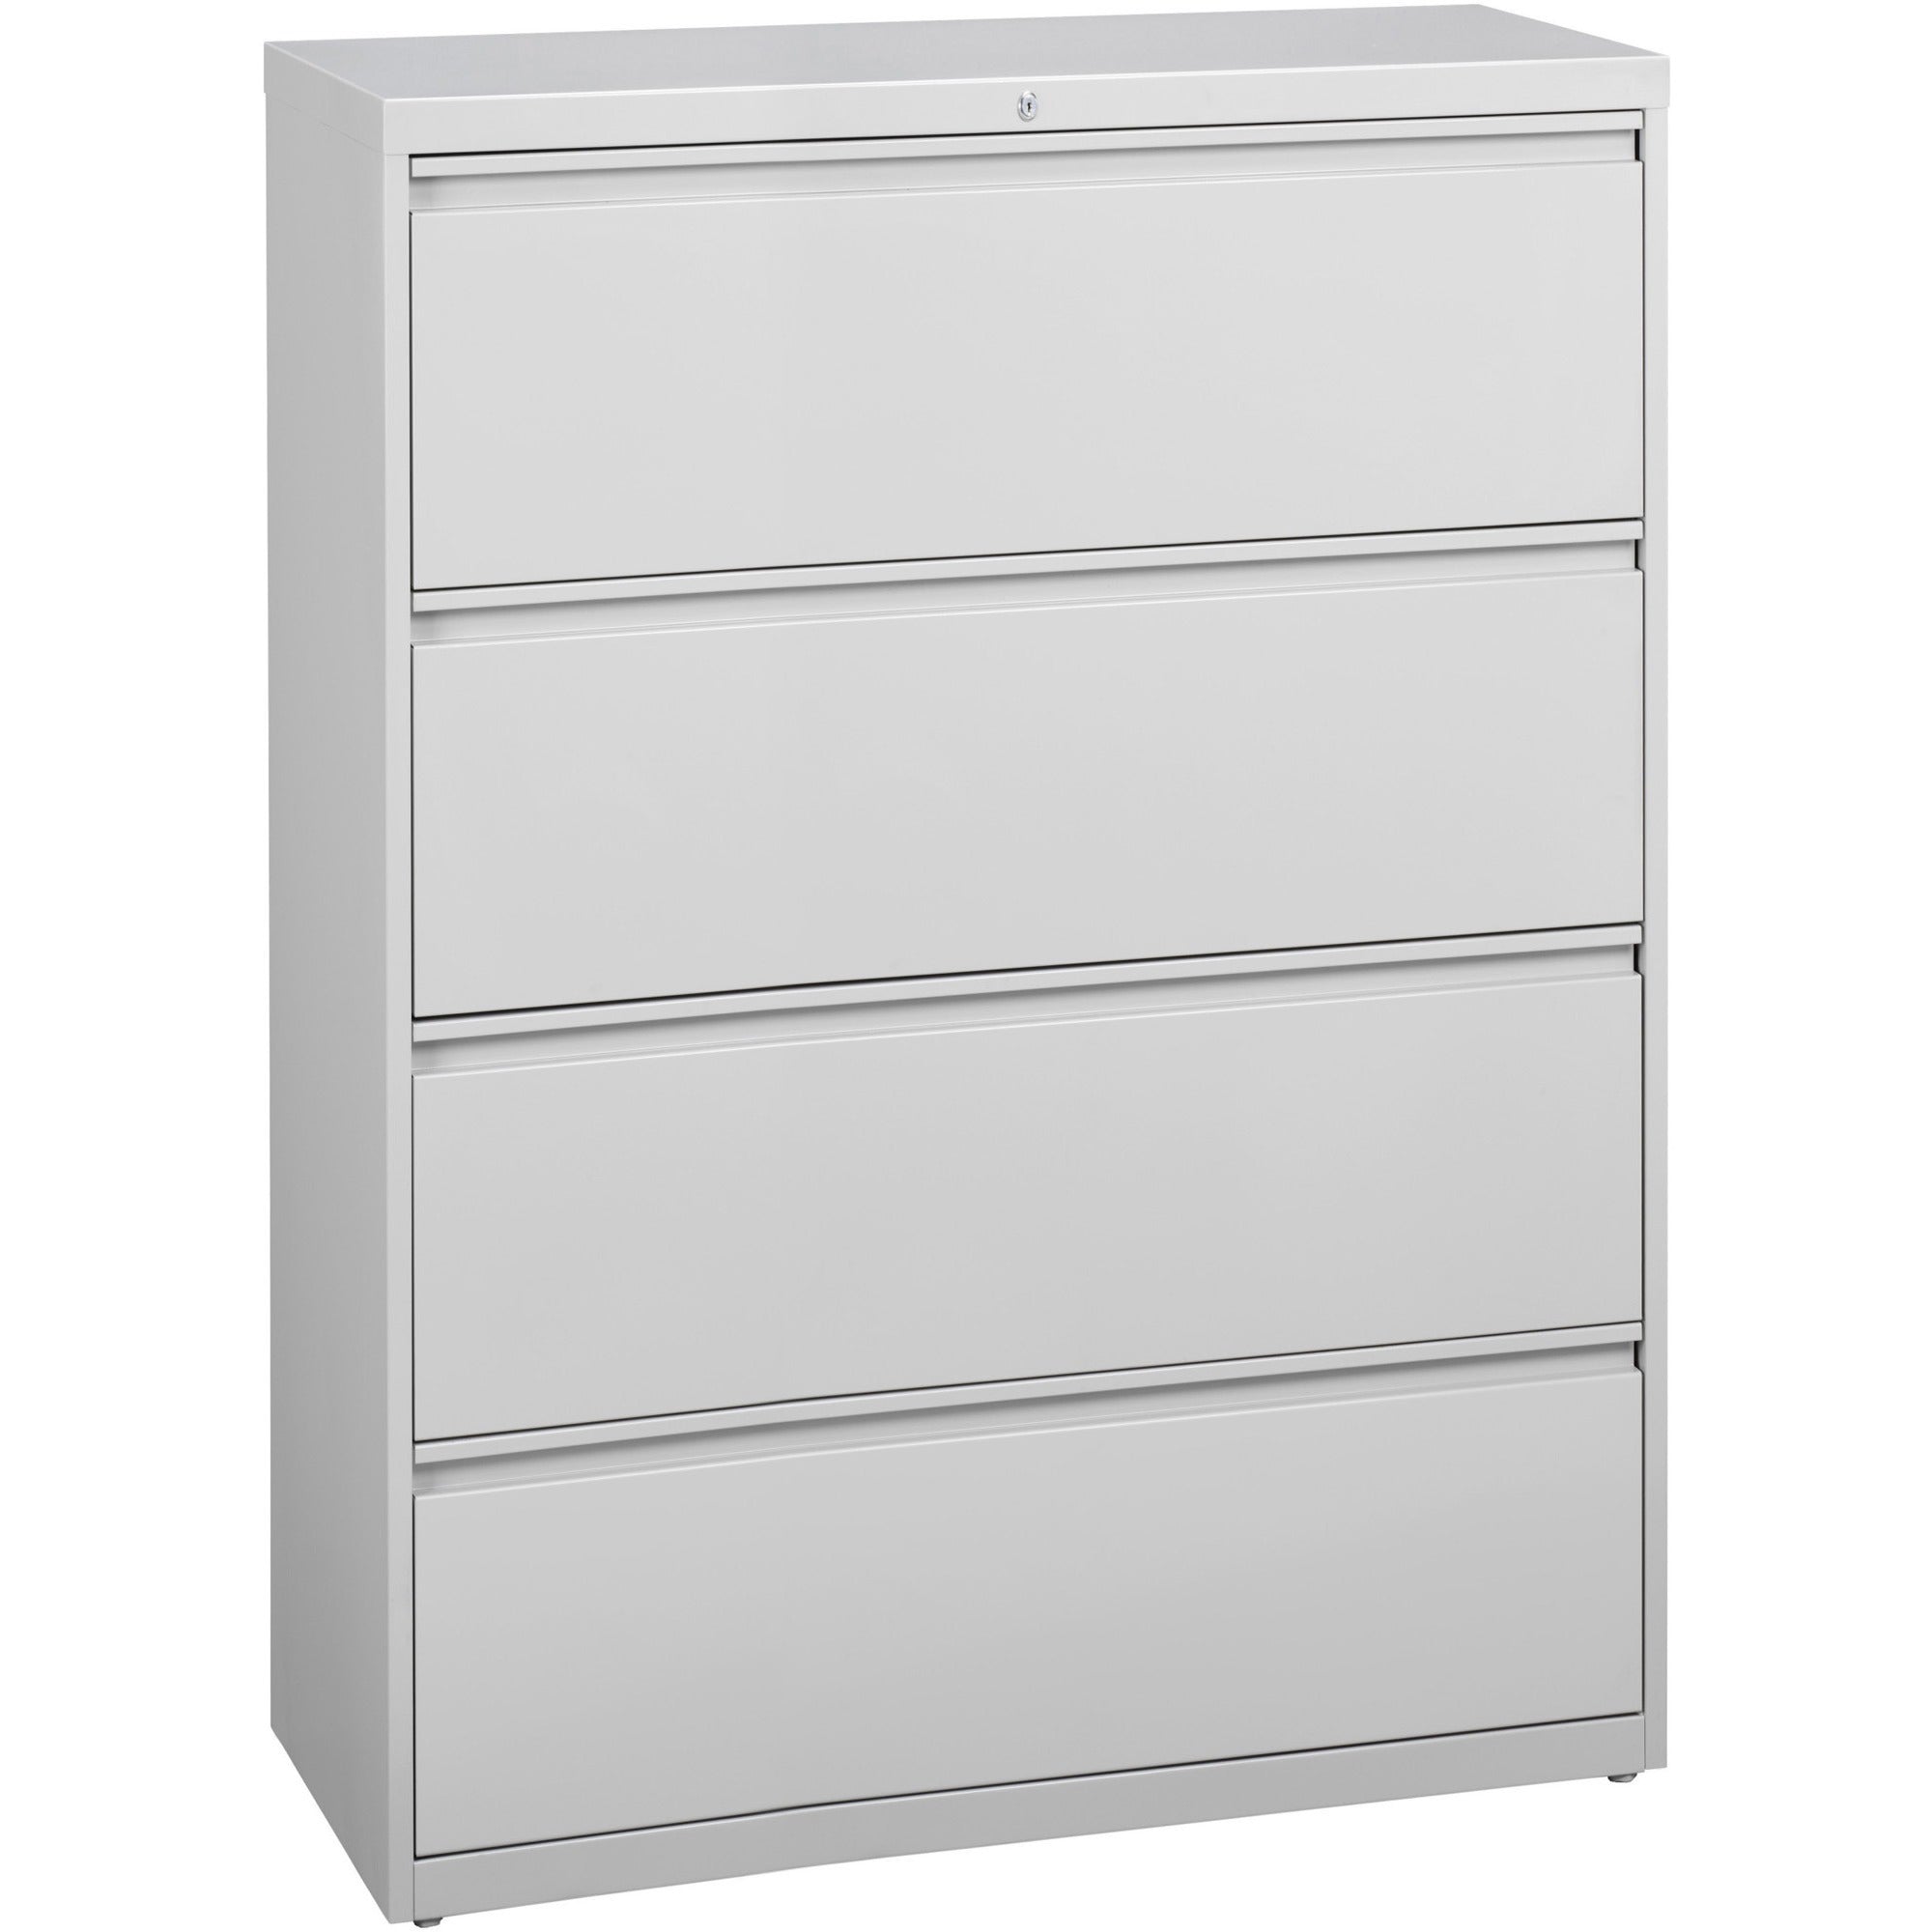 Lorell Fortress Series Lateral File - 42" x 18.6" x 52.5" - 4 x Drawer(s) for File - Legal, Letter, A4 - Lateral - Rust Proof, Leveling Glide, Interlocking, Ball-bearing Suspension, Label Holder - Light Gray - Baked Enamel - Steel - Recycled - 